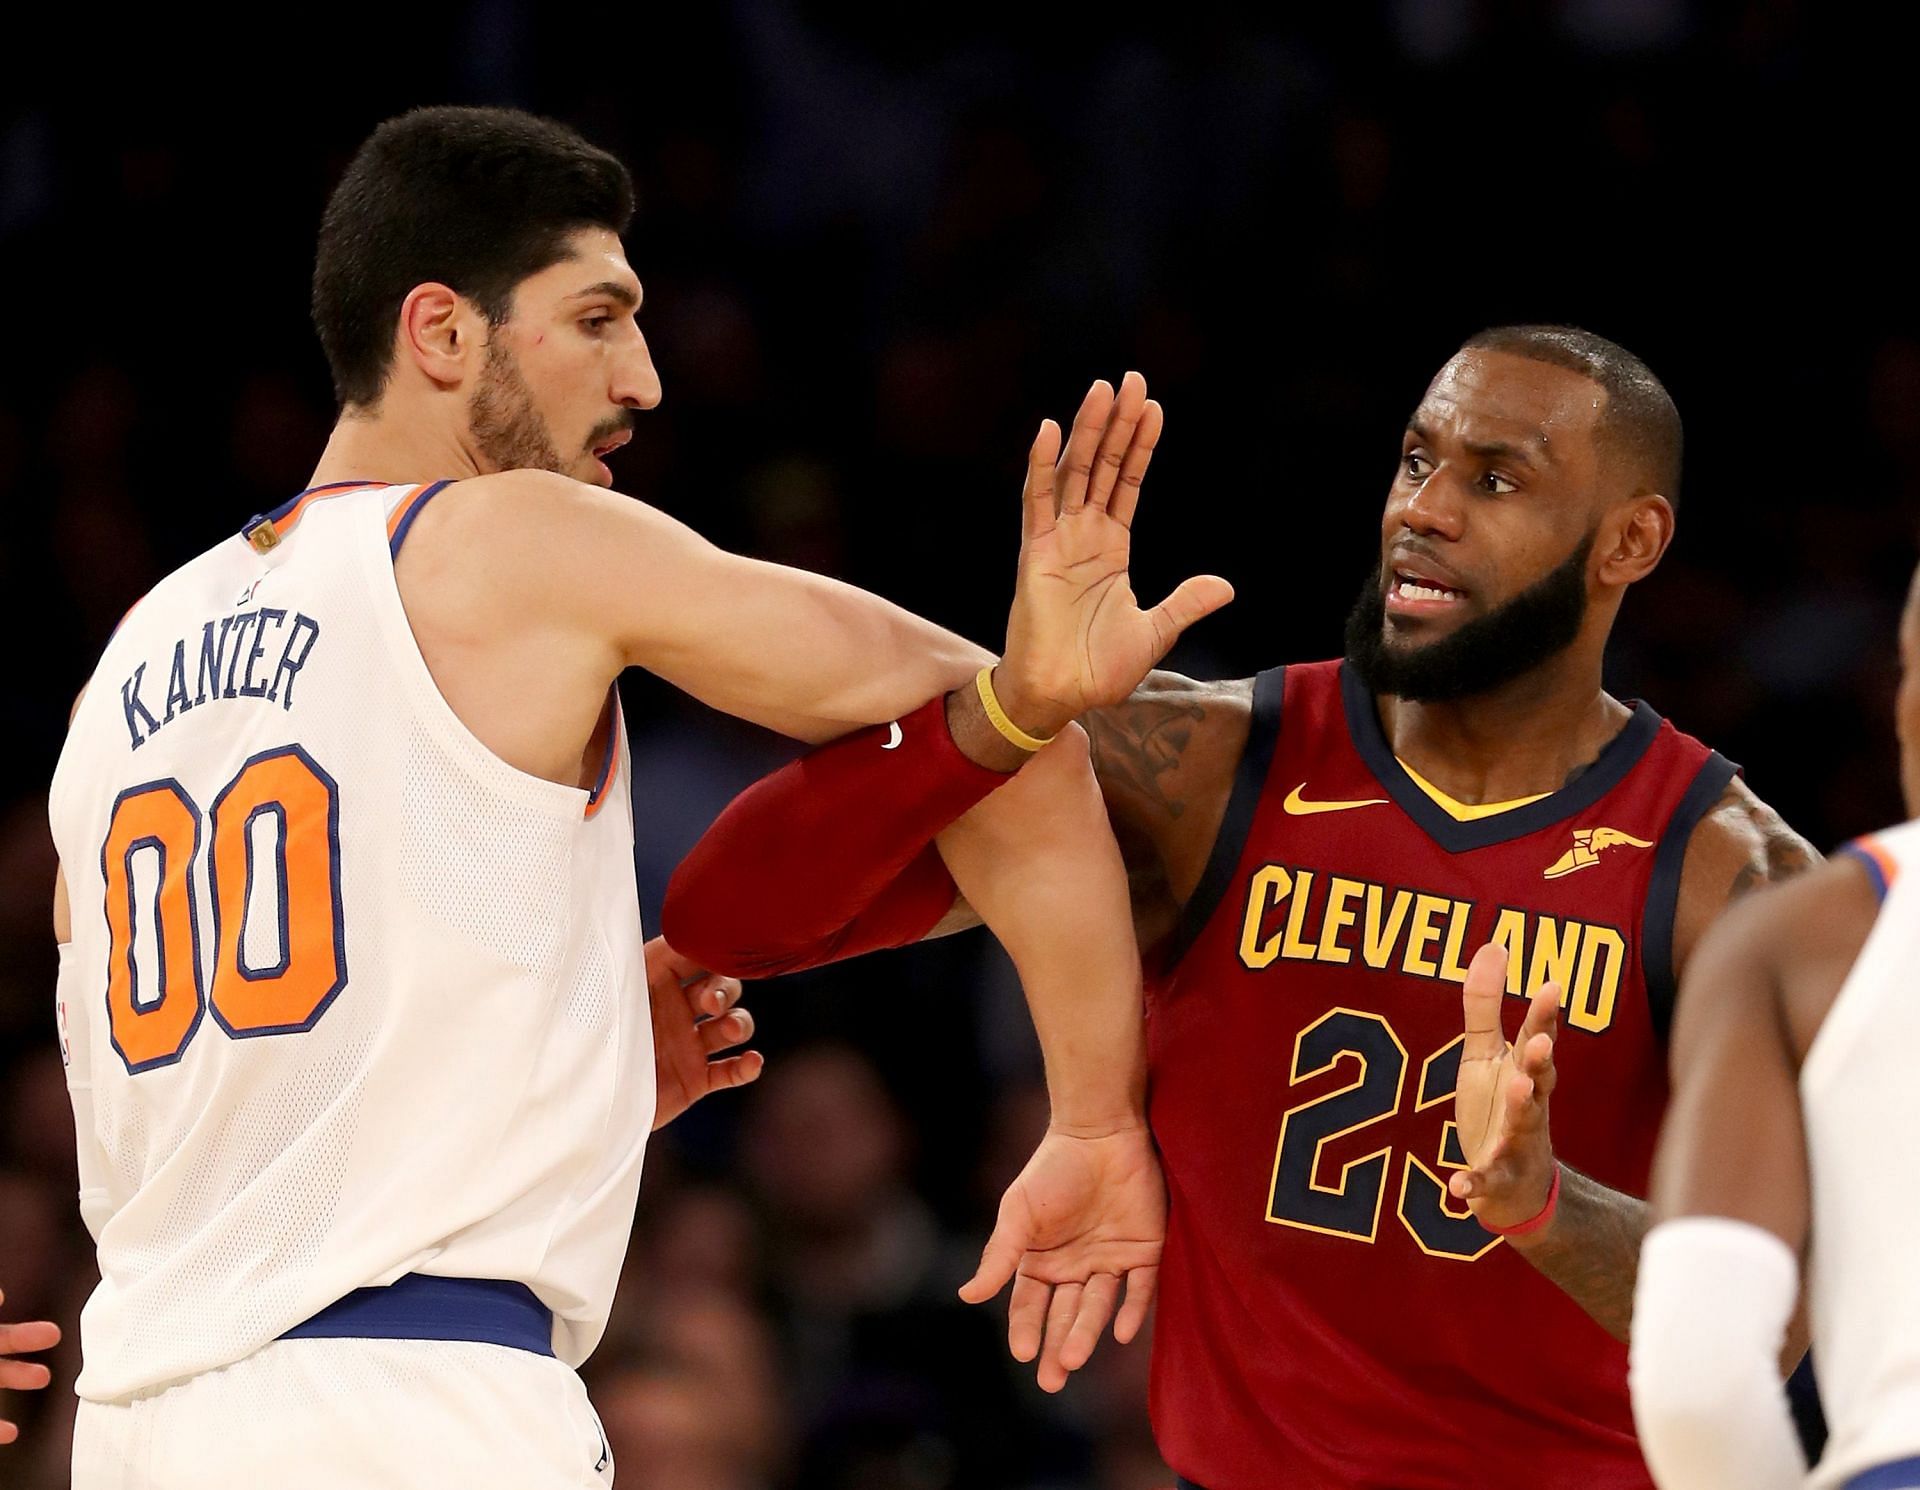 Enes Kanter Freedom and LeBron James back in 2017